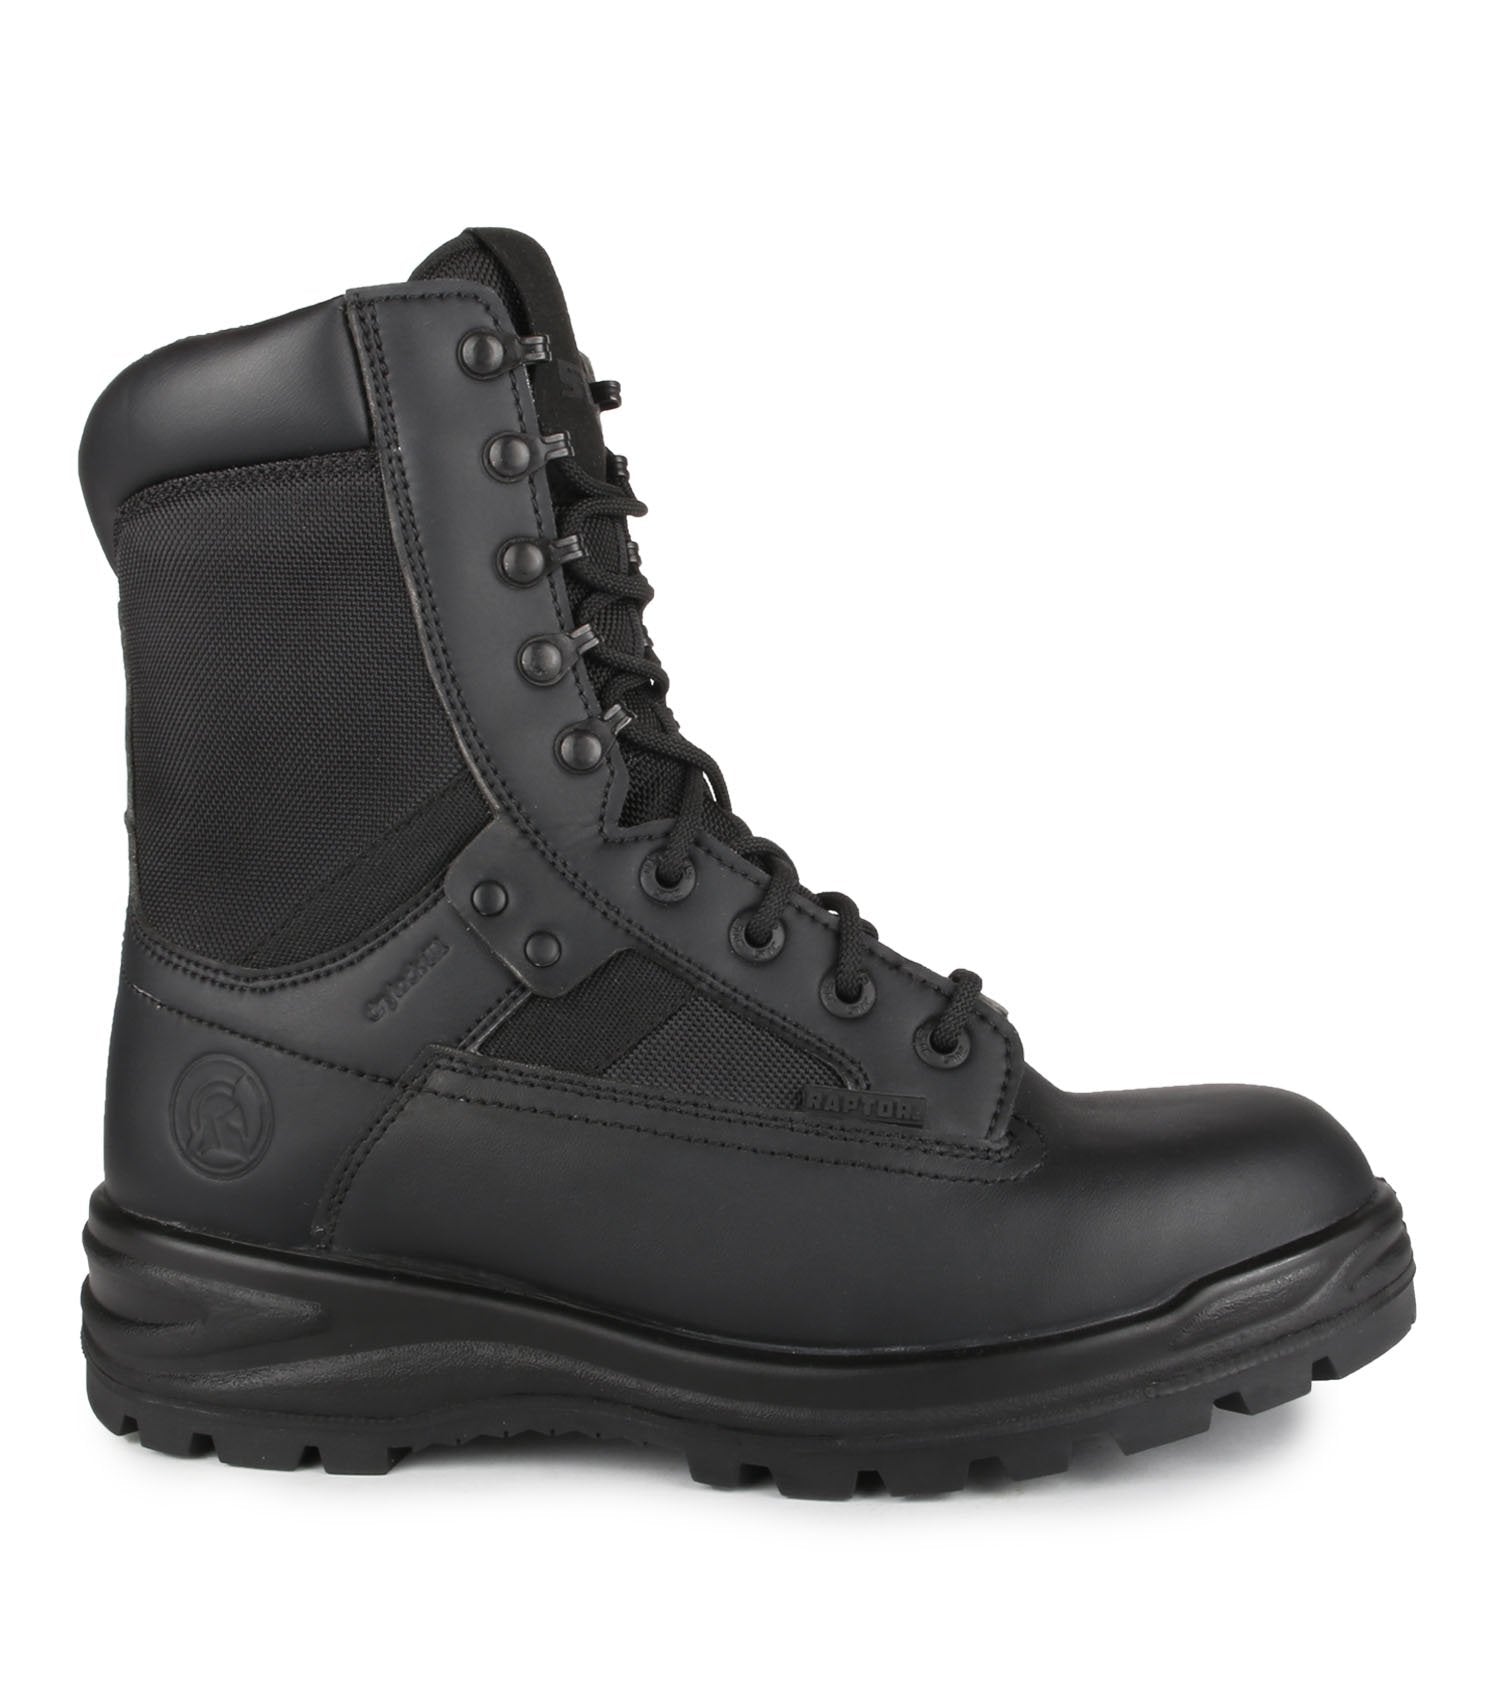 STC 911 EMS / Military Boot with Side-Zip Closure | Black | Sizes 6 - 14 Work Boots - Cleanflow